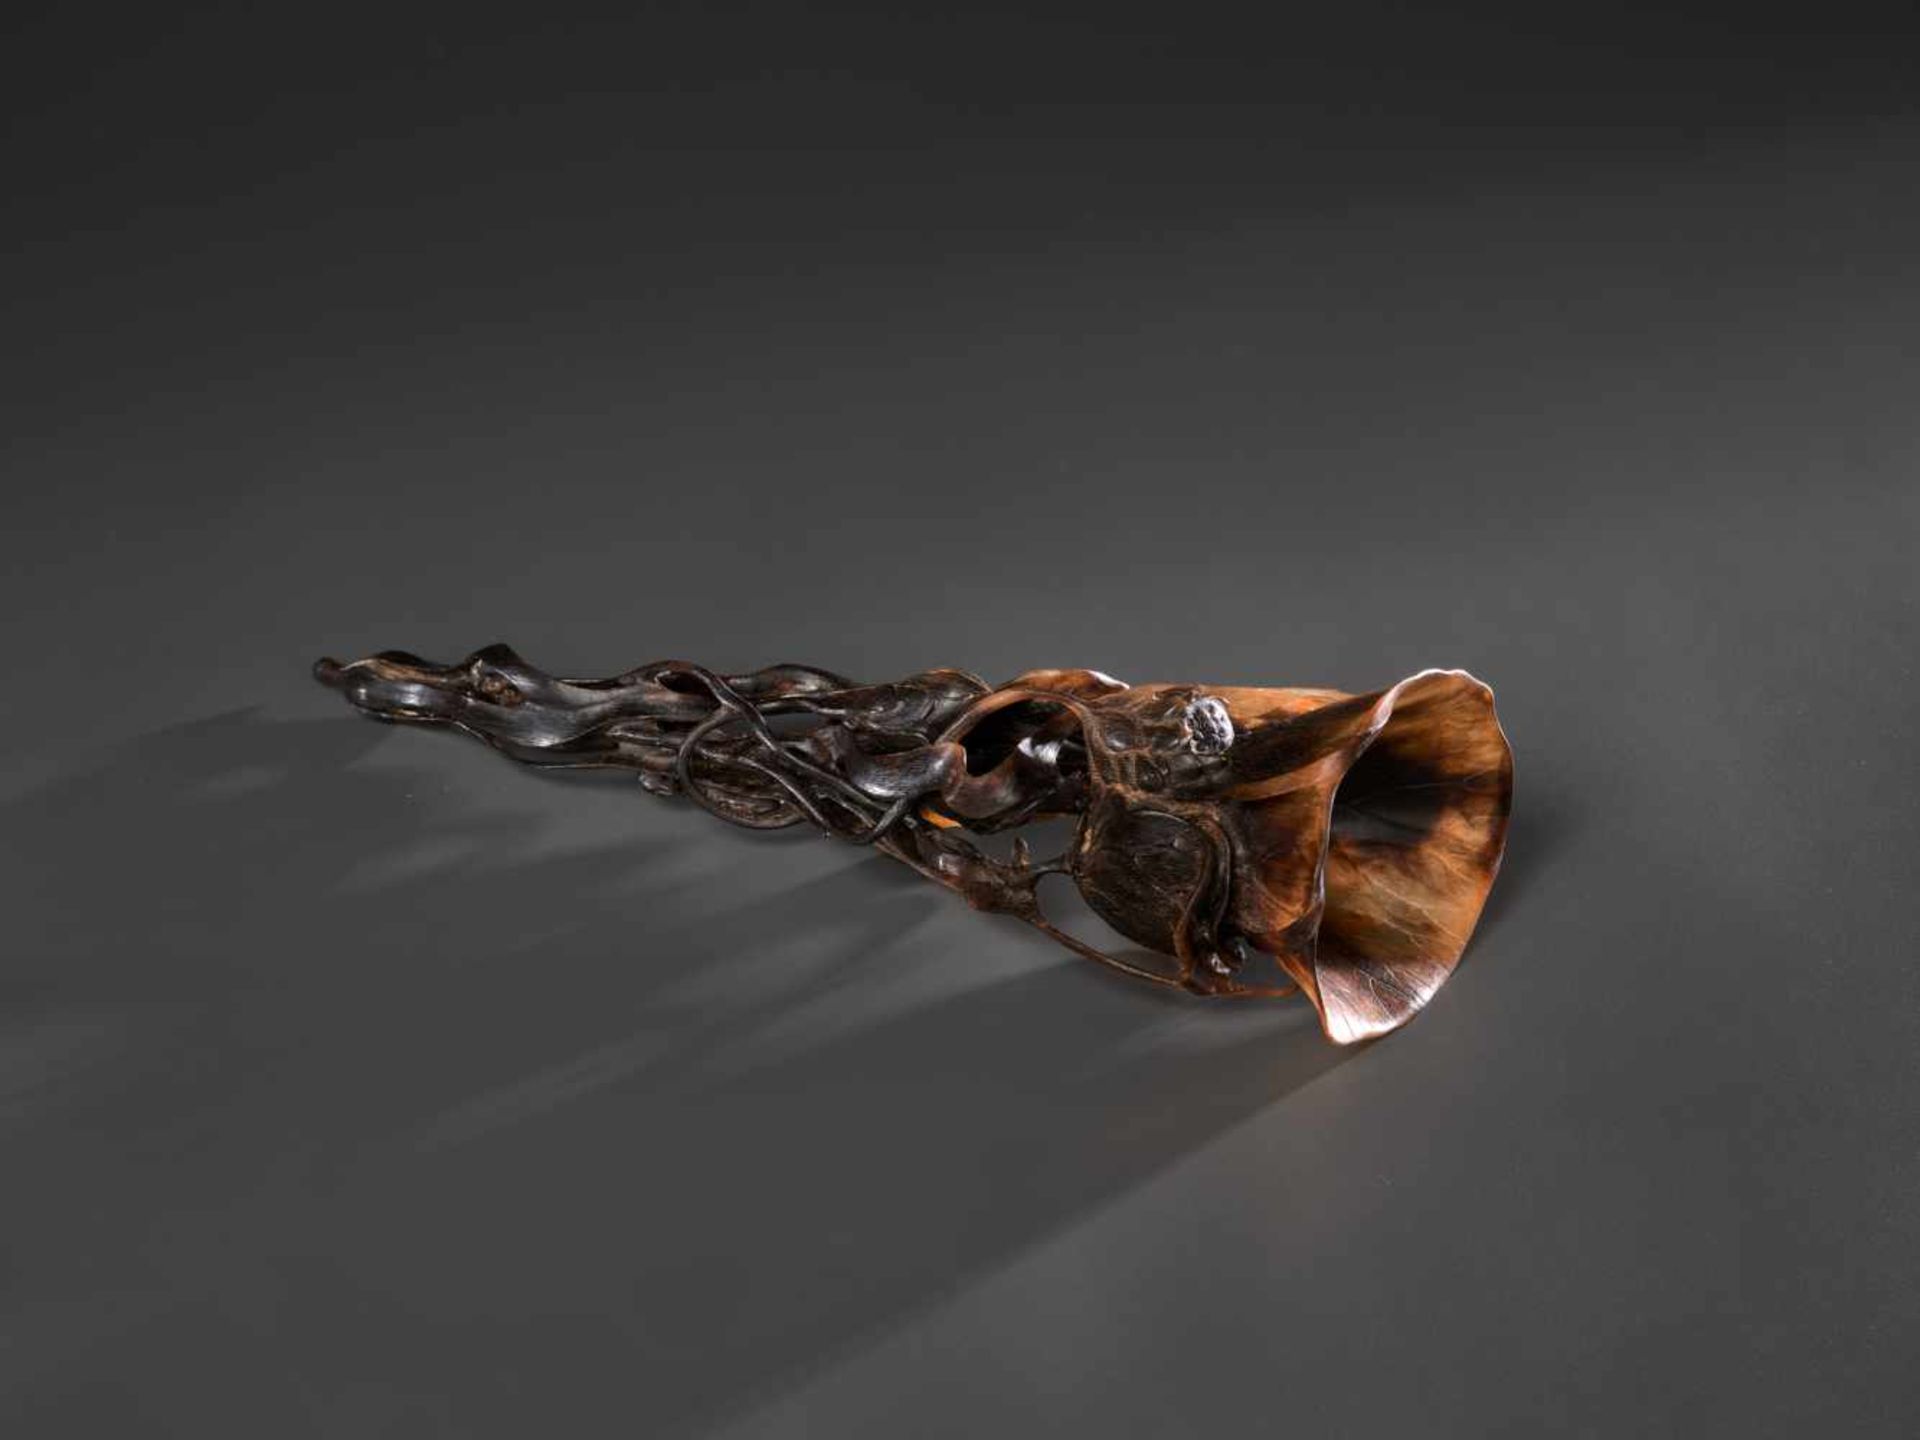 AN 18TH CENTURY RETICULATED FULL TIP RHINOCEROS ‘LOTUS’ CUP Rhinoceros horn in a deep brown to light - Bild 4 aus 9